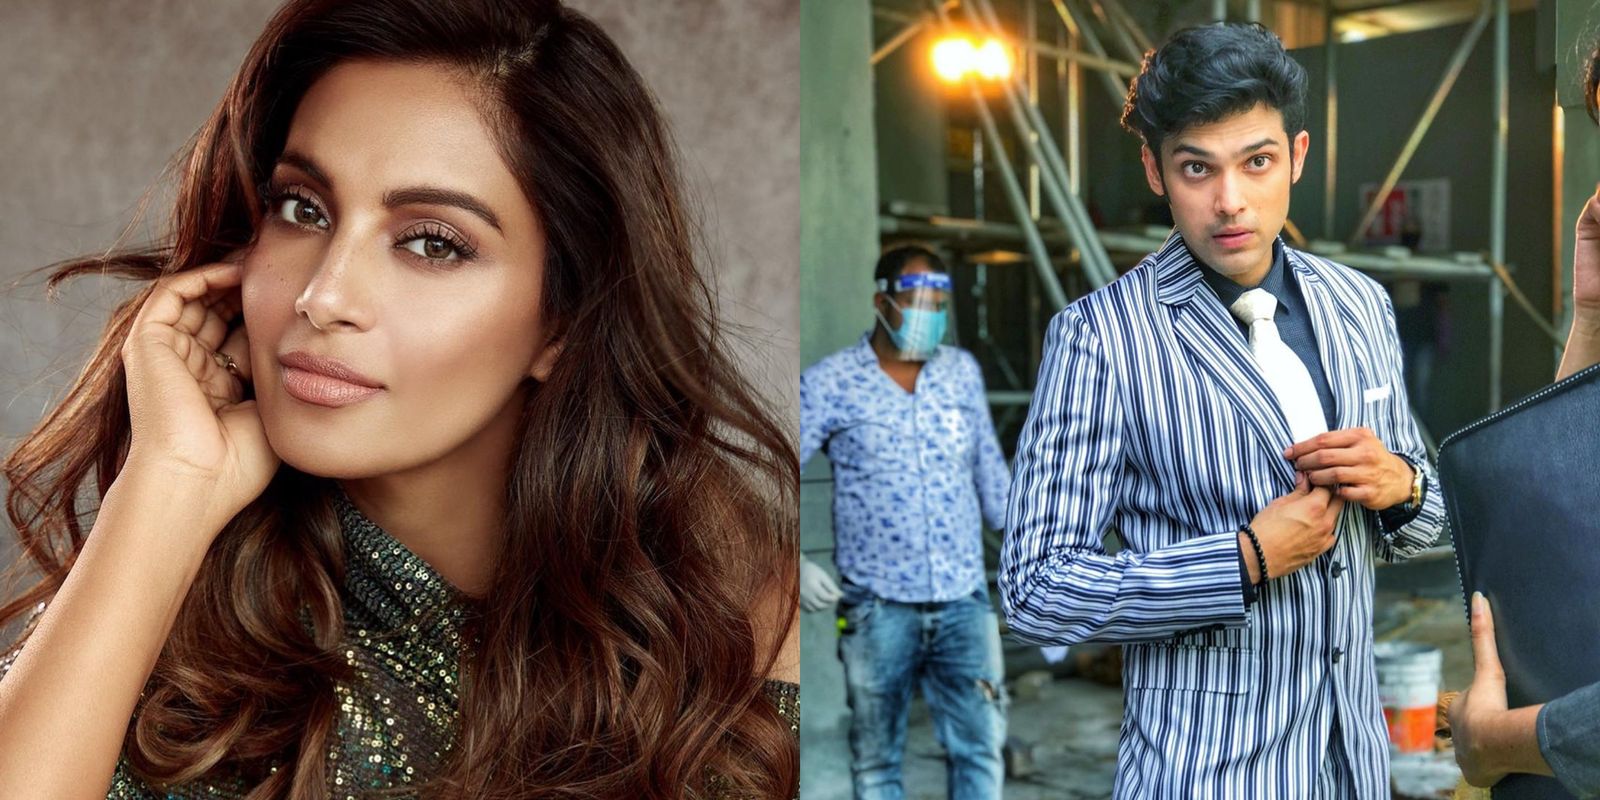 Bipasha Basu Reacts To Parth Samthaan Testing Positive For COVID-19: Actors Shoot Without Protection, It’s Just Plain Risky